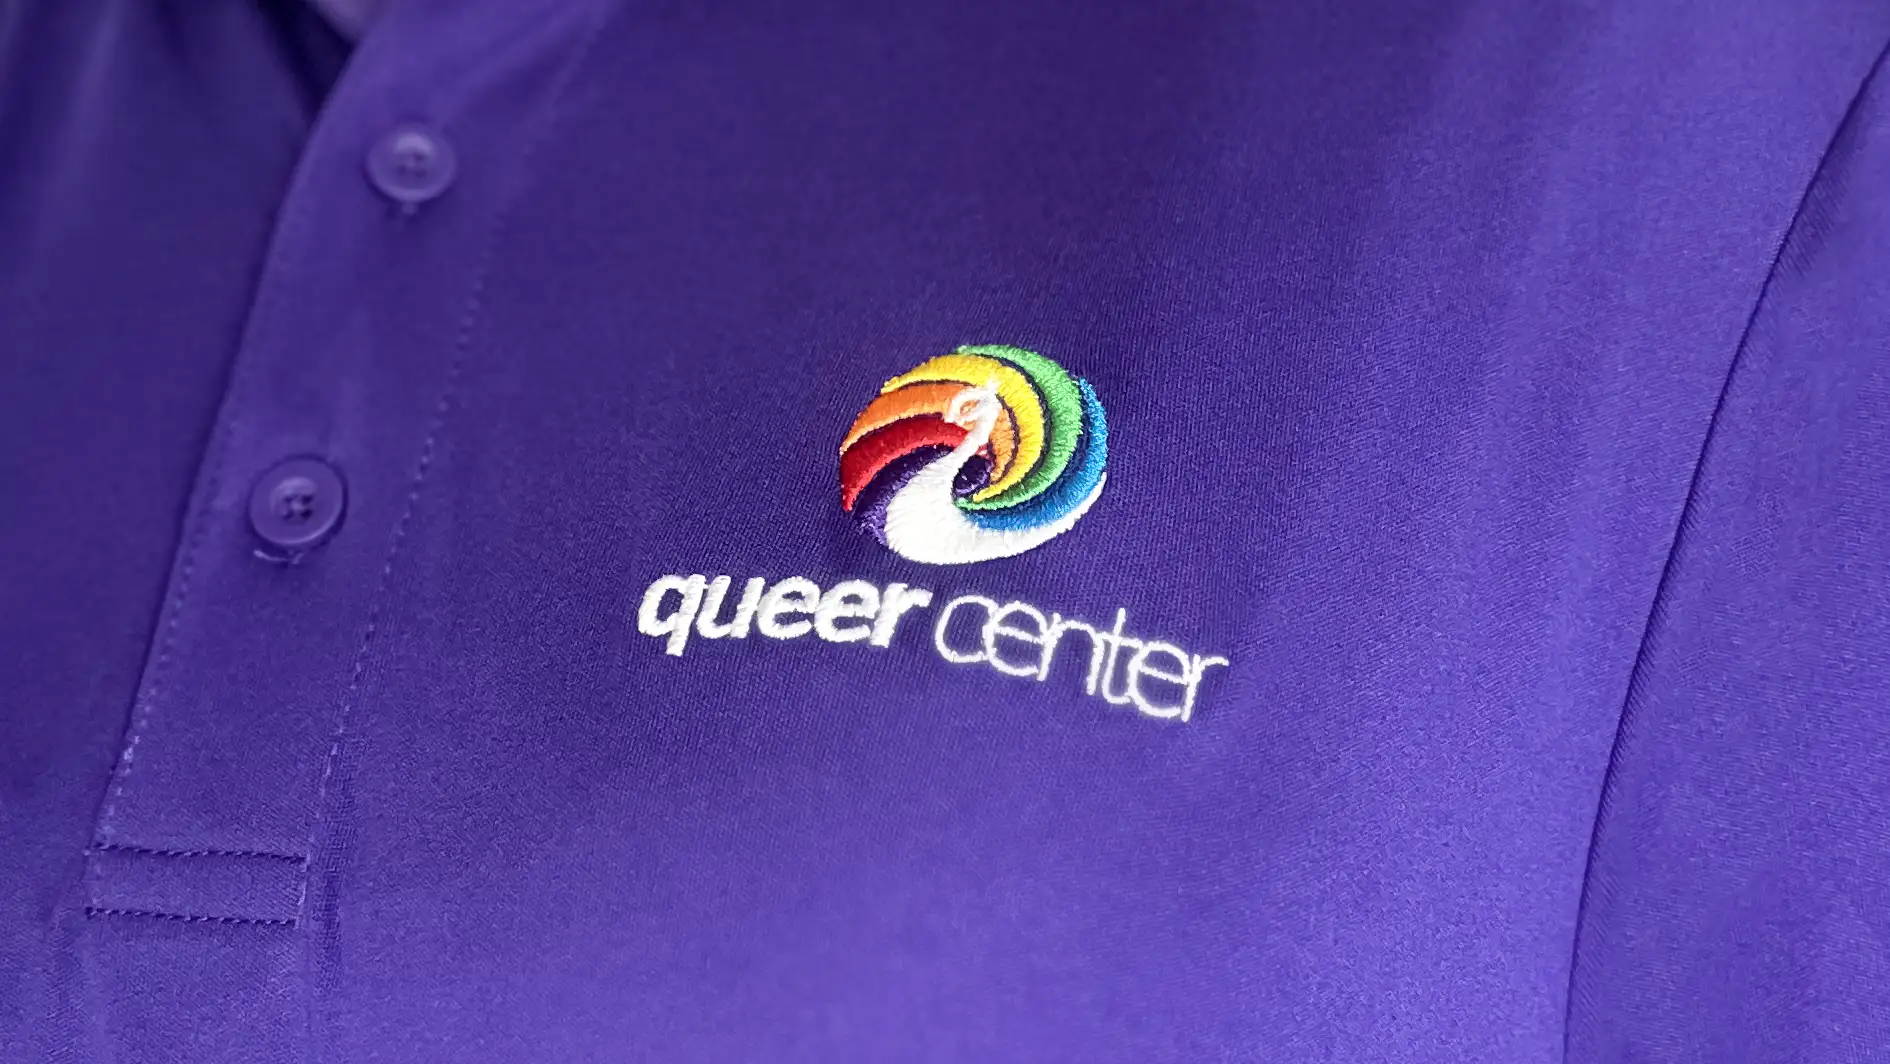 Queer Center logo by Dusty Drake embroidered on a shirt